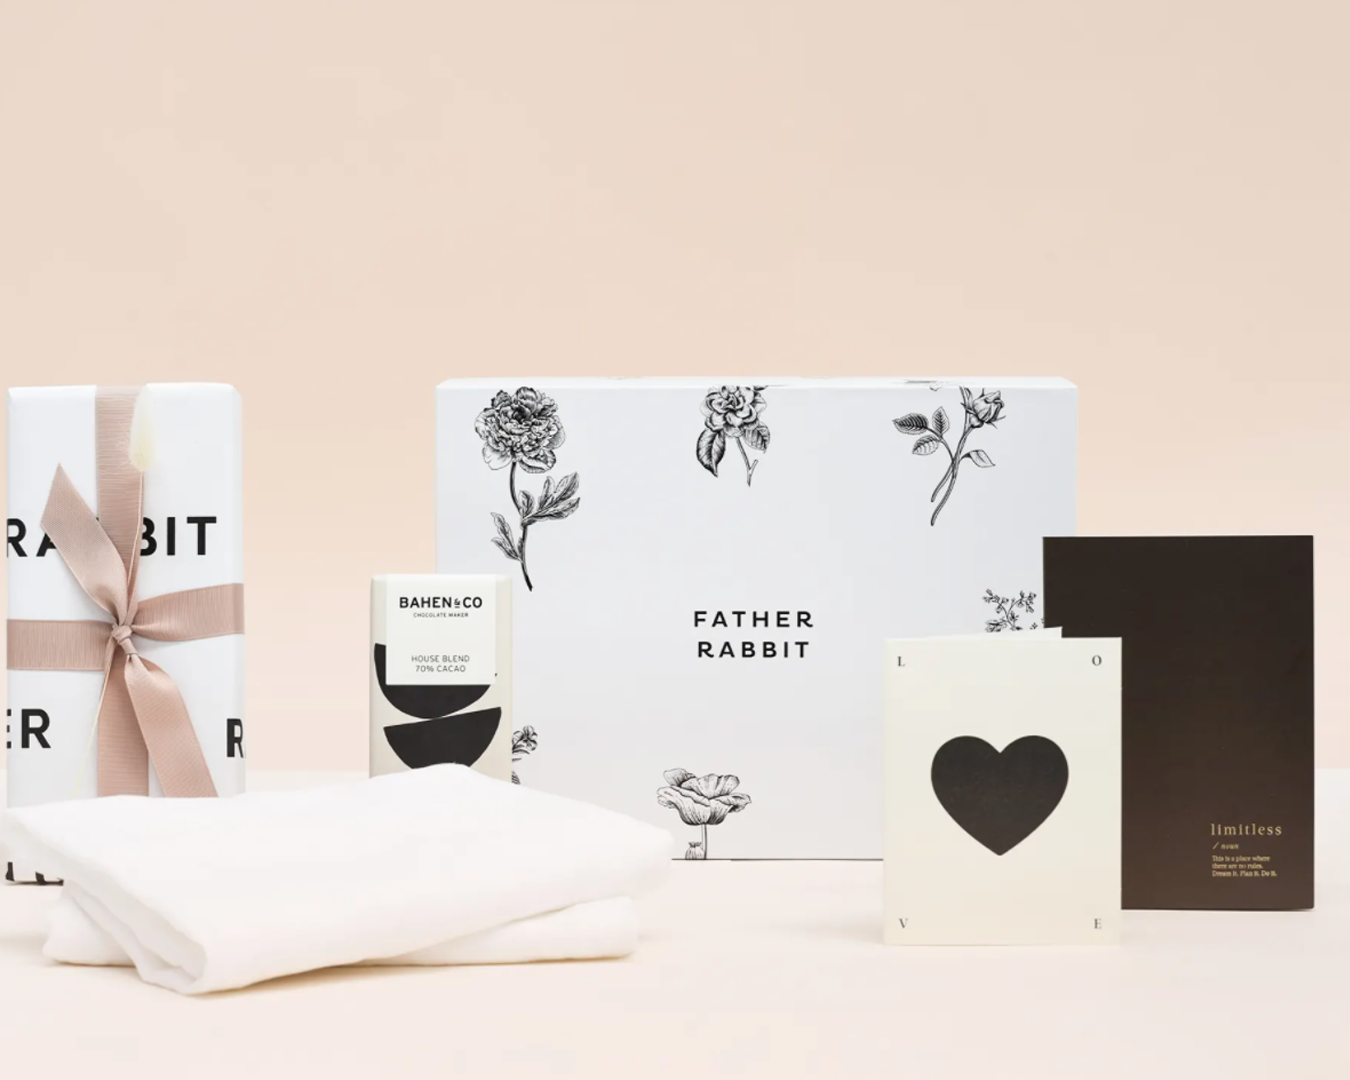 An array of black and white gifts like pillow cases and chocolate sitting beside a black and white illustrated gift box